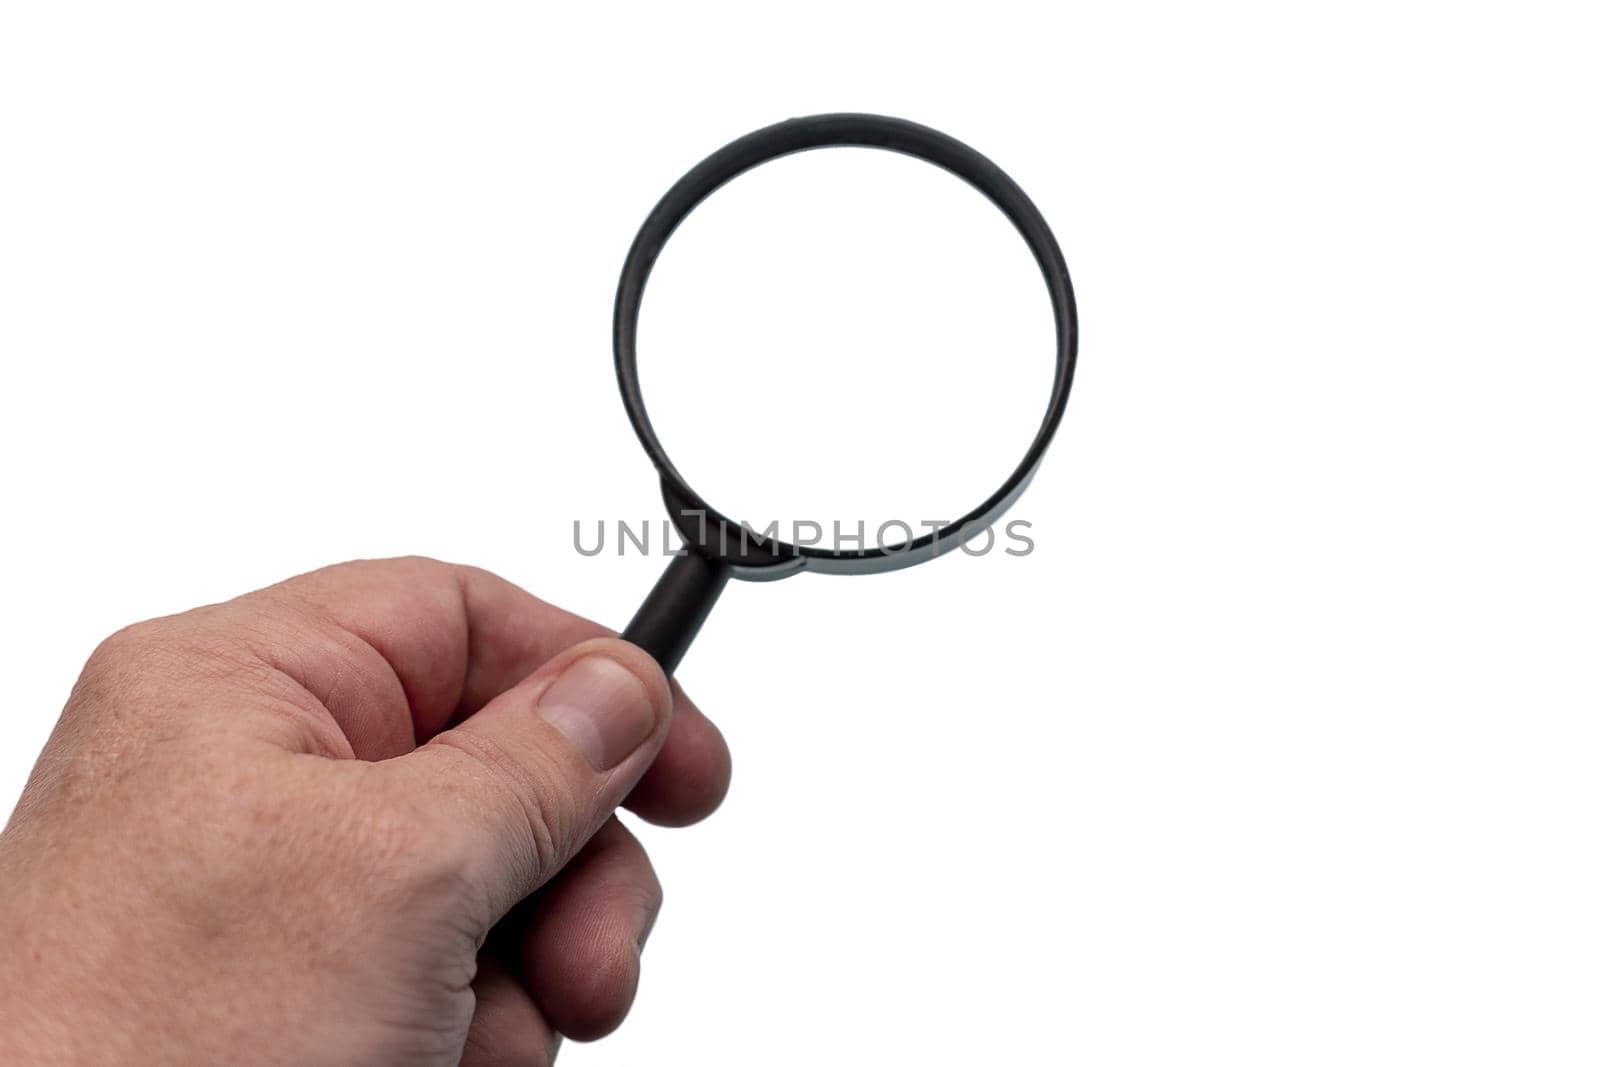 The hand holds a magnifying glass isolate against a white background. by Essffes